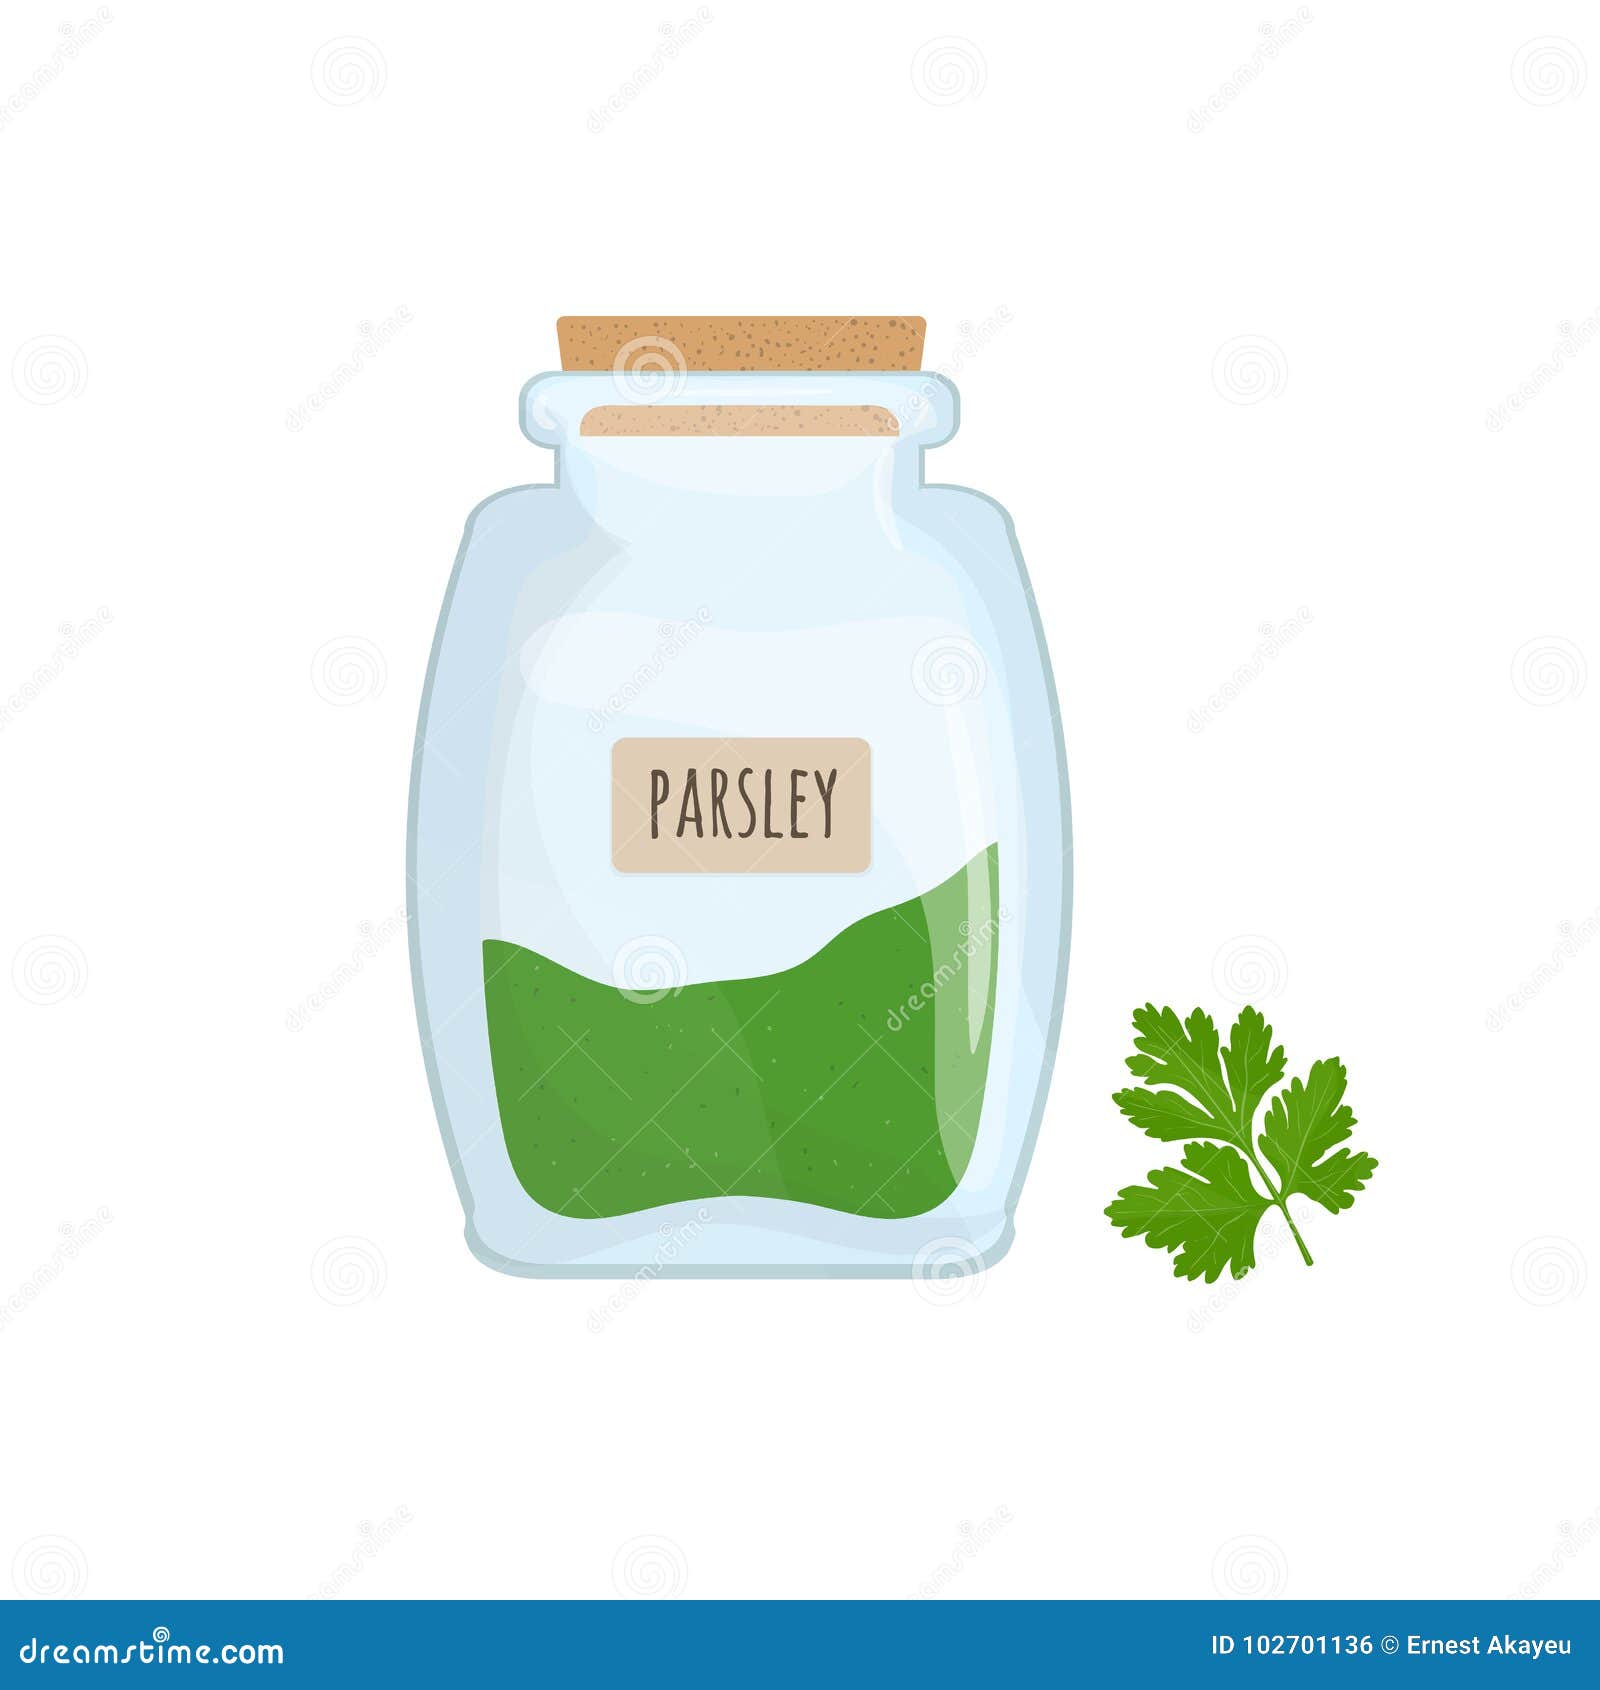 minced and dried parsley stored in glass jar  on white background. aromatic herb, tasty food spice, herbal